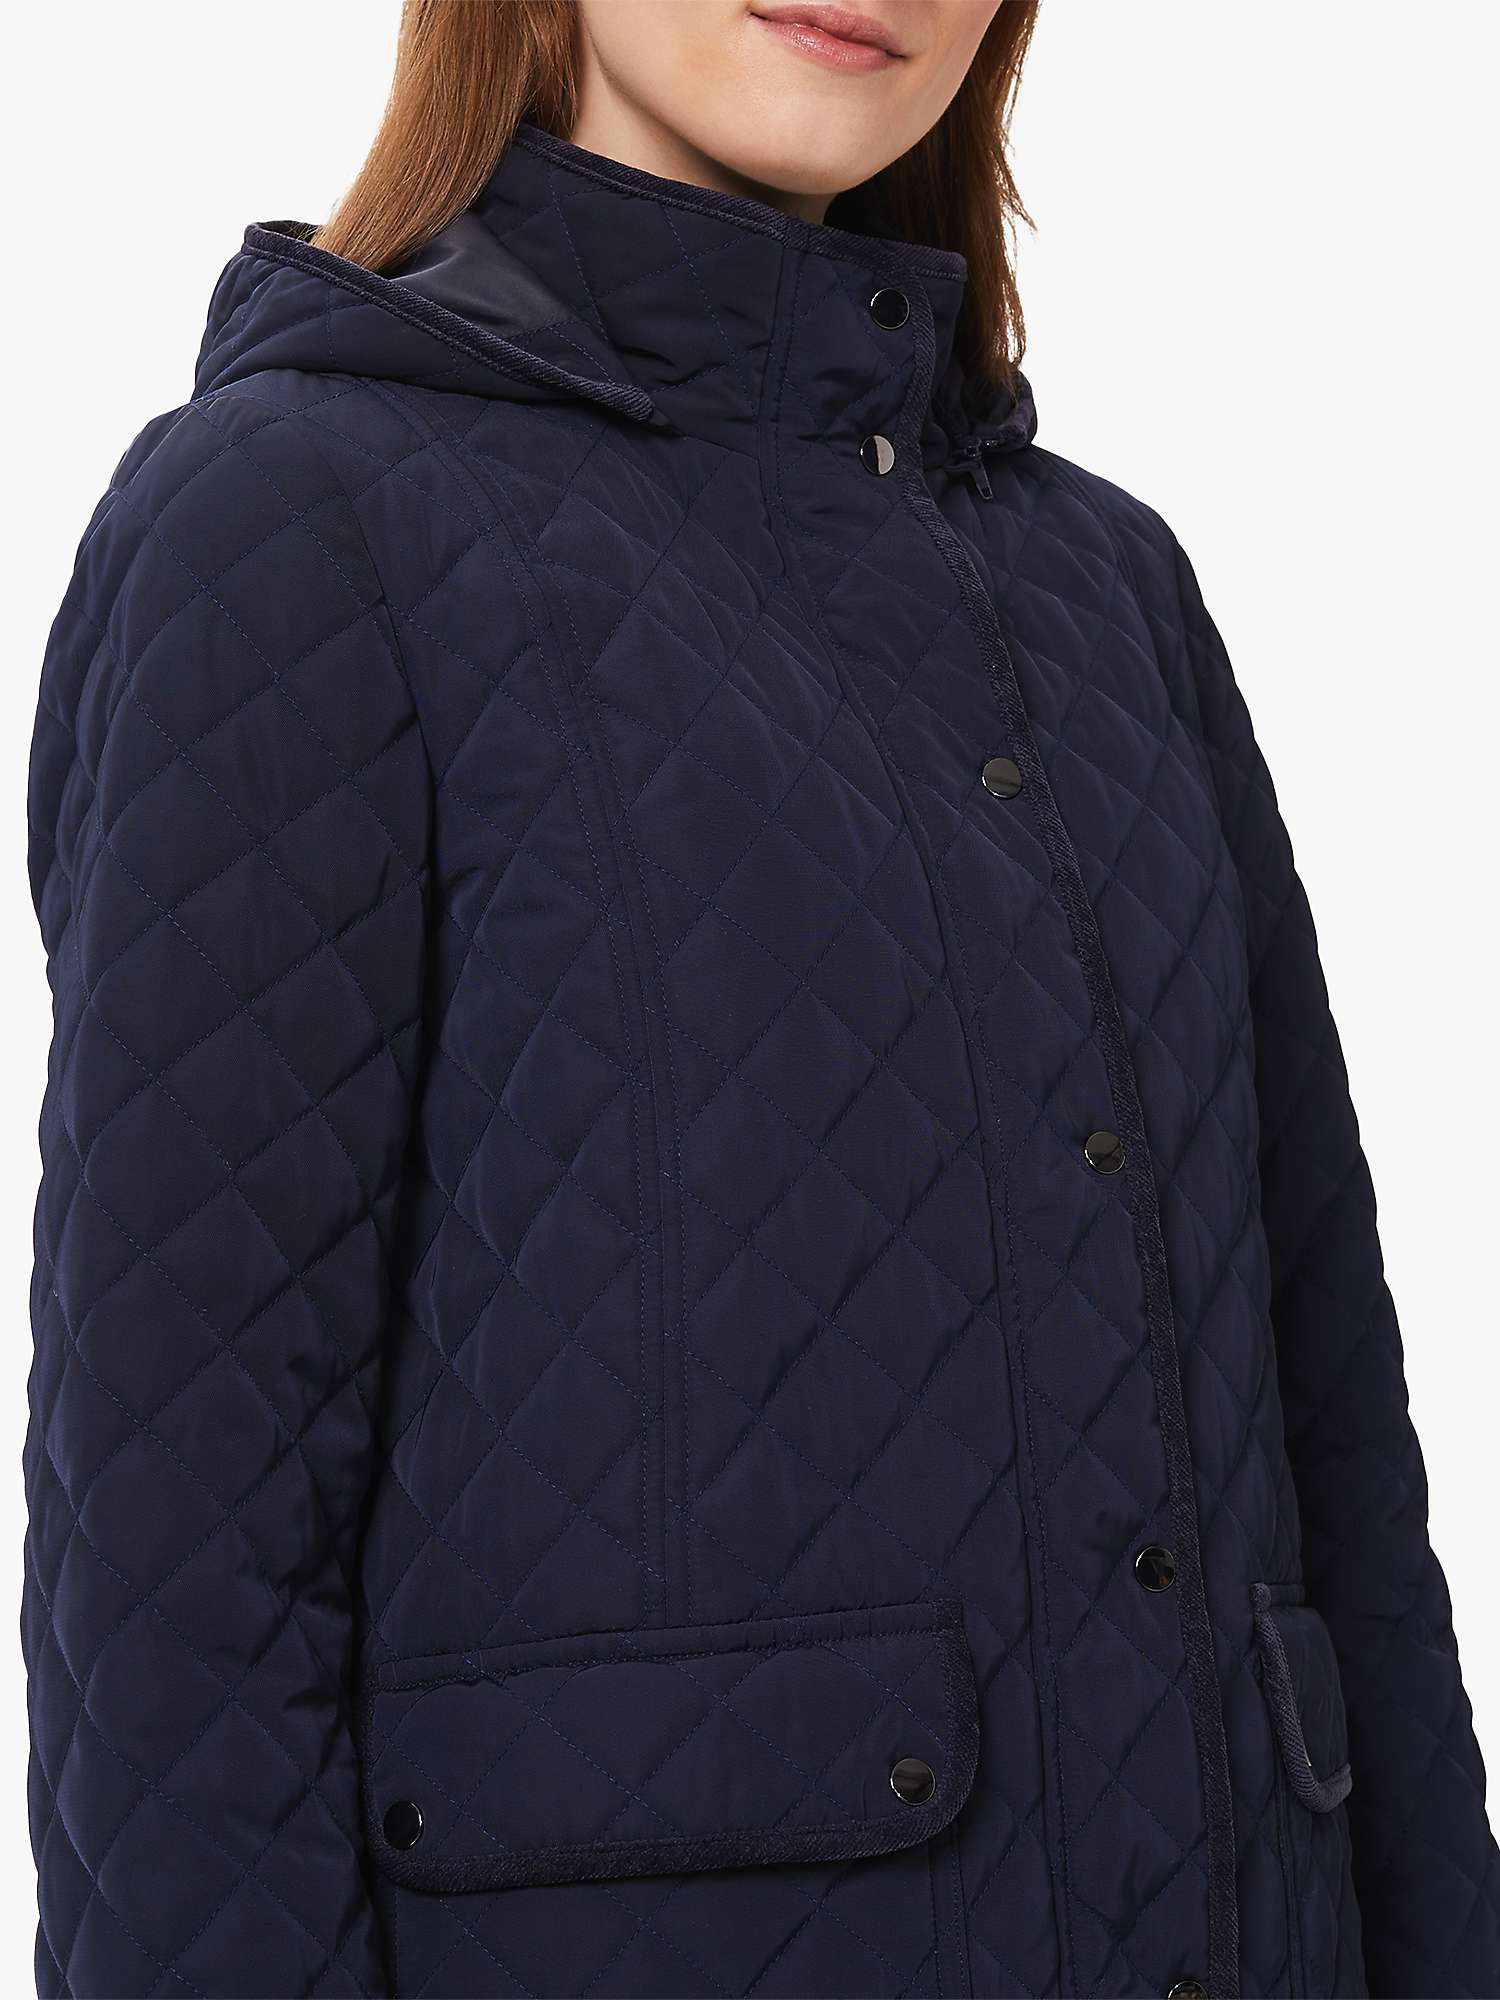 Hobbs Hooded Quilted Coat, Navy at John Lewis & Partners